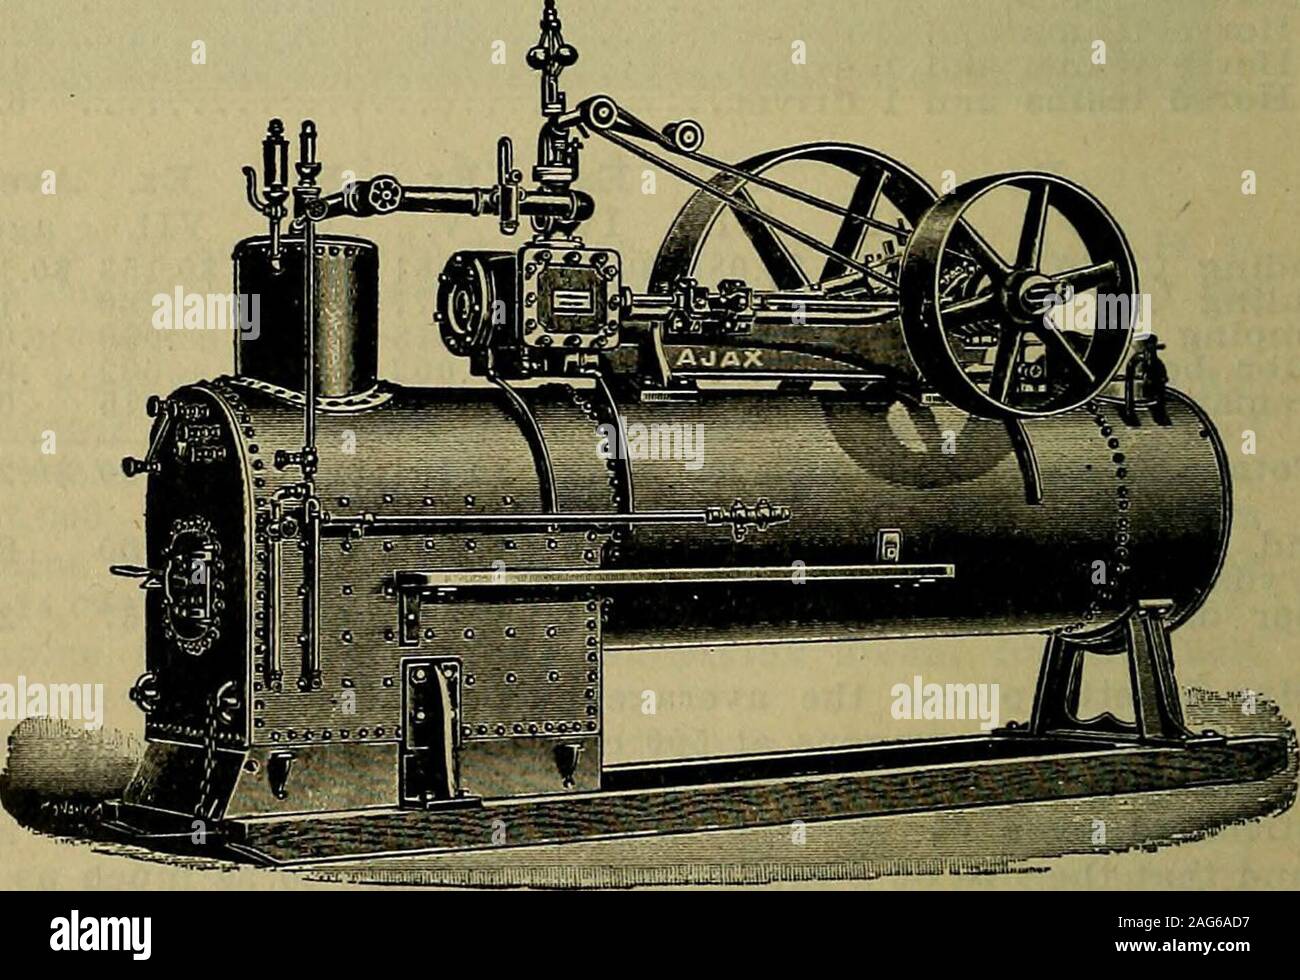 . Handbook of construction plant, its cost and efficiency. Fig. 98. 10x10-inch Cylinder Simple Portable Engine.. Fig. 99. Ajax Center Crank Engine on Skids. ENGINES TABLE 114—STEAM ENGINES—I Prices and sizes of simple center crank engines, without boilers,are: Price. H. P. Bore. Str $116 4 4%, 6 127 5 5 6 142 6 5% 8 153 8 6% 8 173 10 7 10 184 12 7% 10 211 15 8% 11 ?229 18 9 11 280 20 9% 12 293 25 10 12 369 30 10 15 403 35 11 15 451 40 12 15 215200200190180175170150150130130125 Weight.750 lbs.825 lbs.1,270 lbs.1,300 lbs.1,950 lbs.2,025 lbs.2,375 lbs.2,450 lbs.3,230 lbs.3,600 lbs.4,300 lbs.4,950 Stock Photo